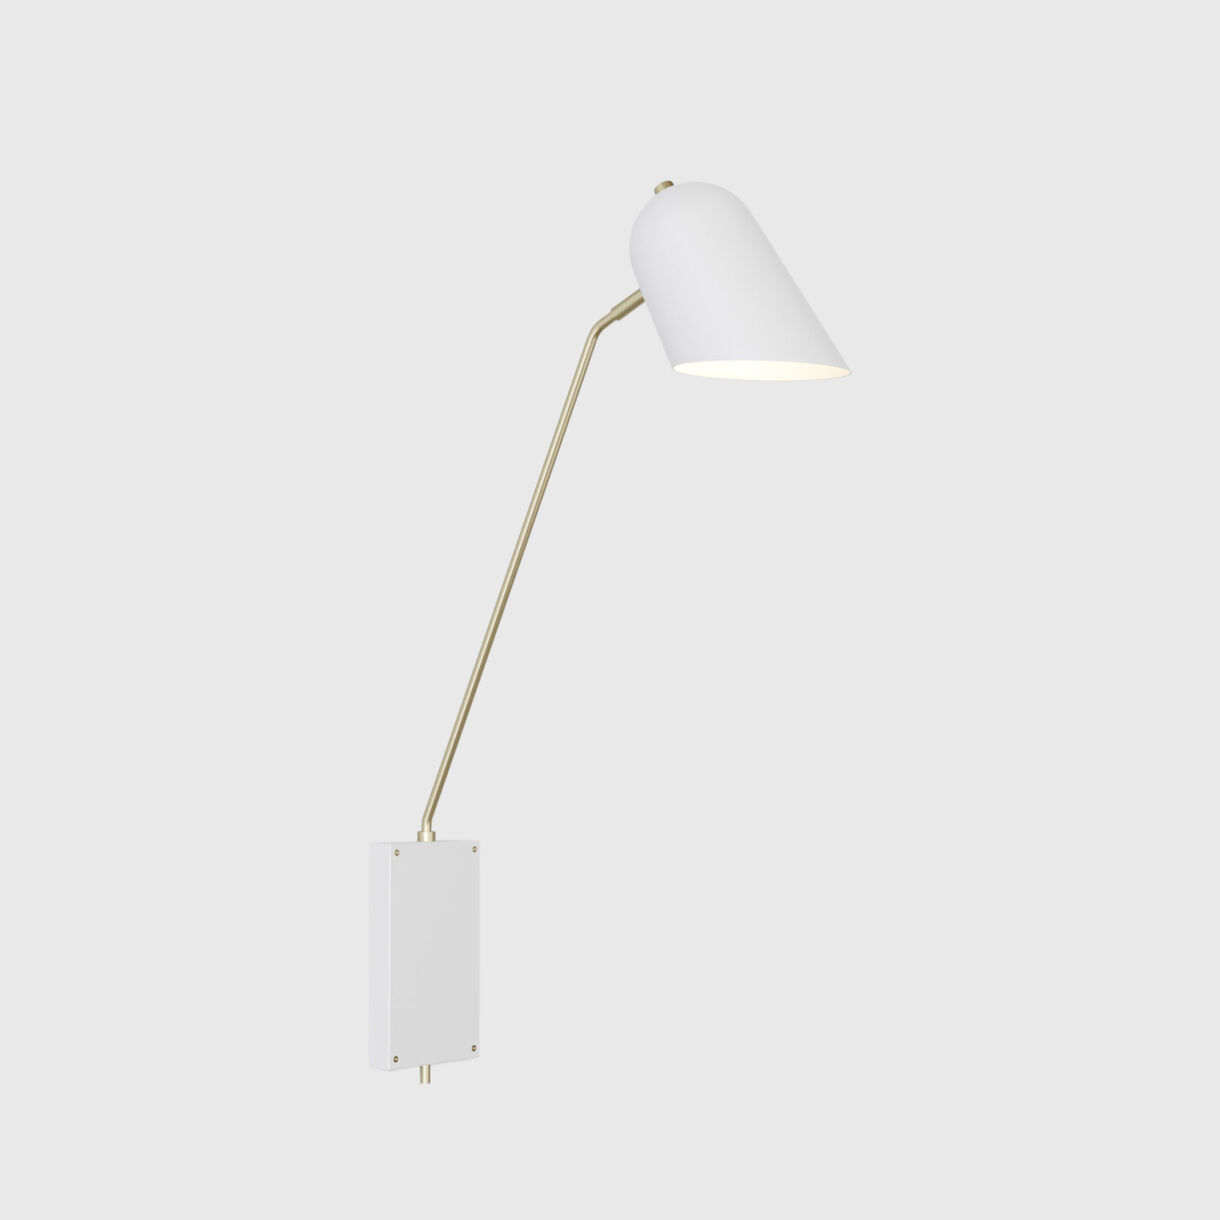 Cliff 06 Wall Lamp, Hardwire, White & Brass